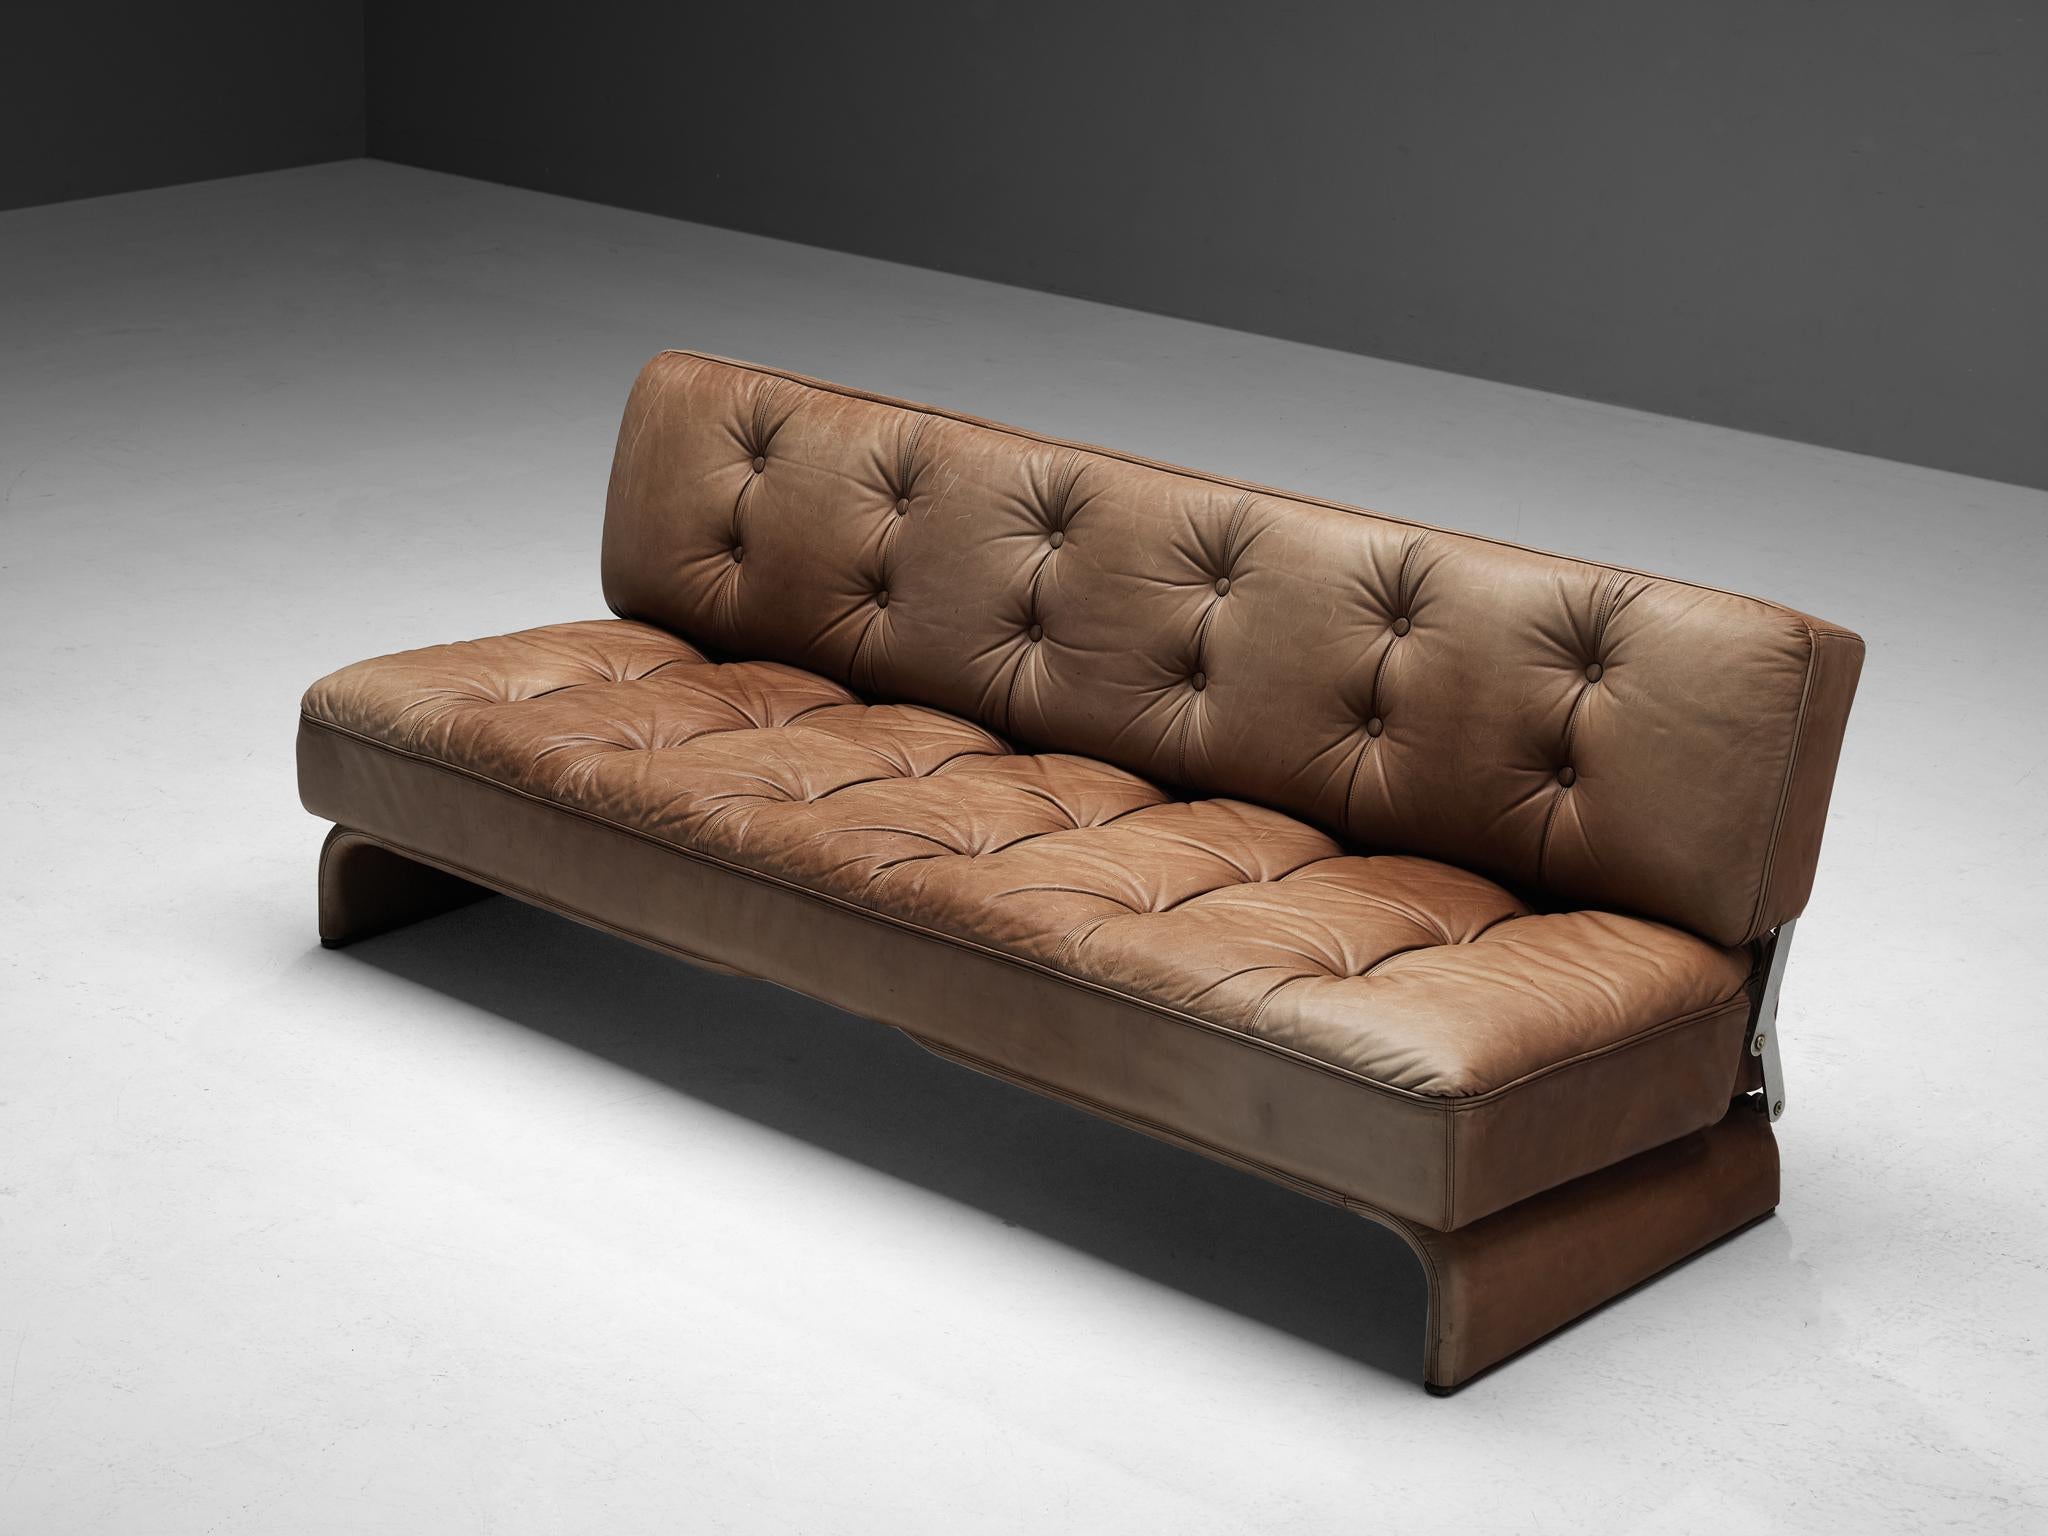 Johannes Spalt for Wittmann, 'Constanze' daybed or sofa, cognac leather, metal, wood, Austria, 1960s. 

This beautiful sofa designed by architect Johannes Spalt, is typical for Mid-Century Modern design from Austria of the 1960s. The tufted cognac